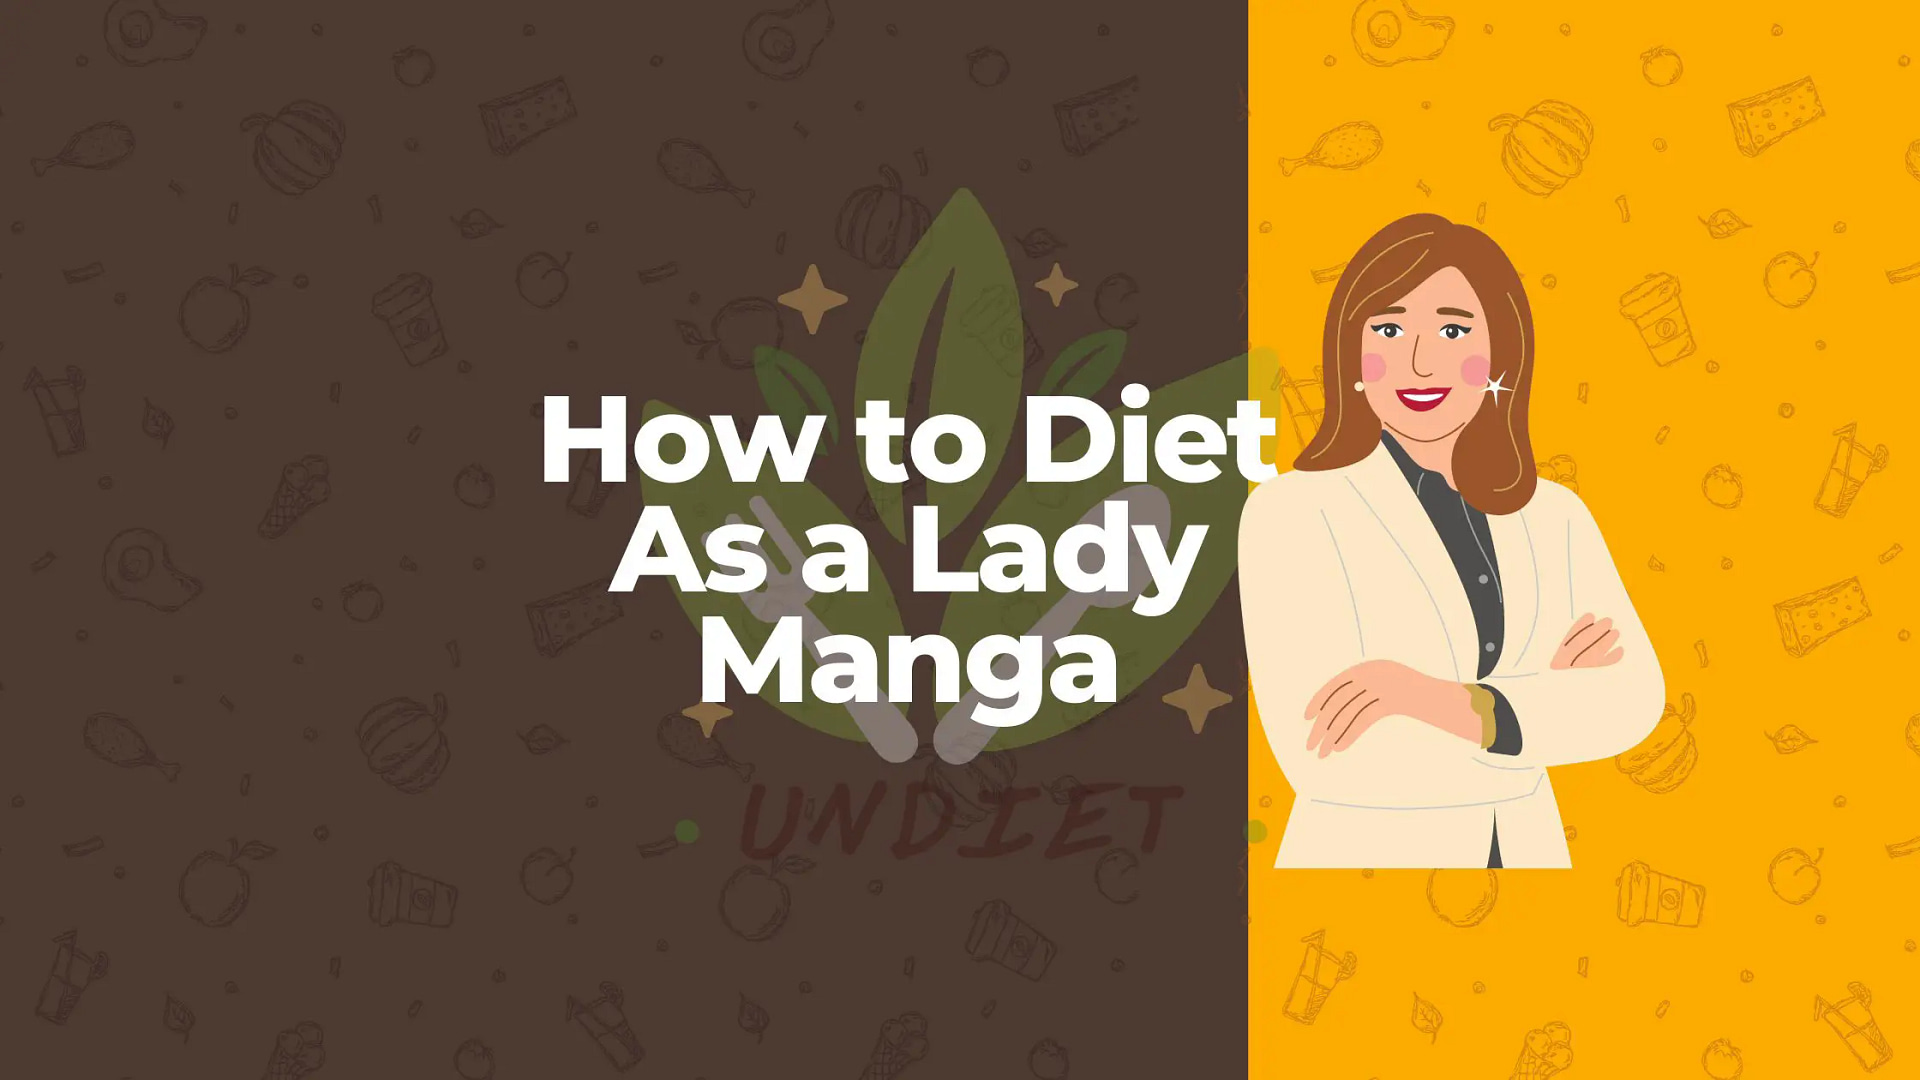 How to Diet As a Lady Manga